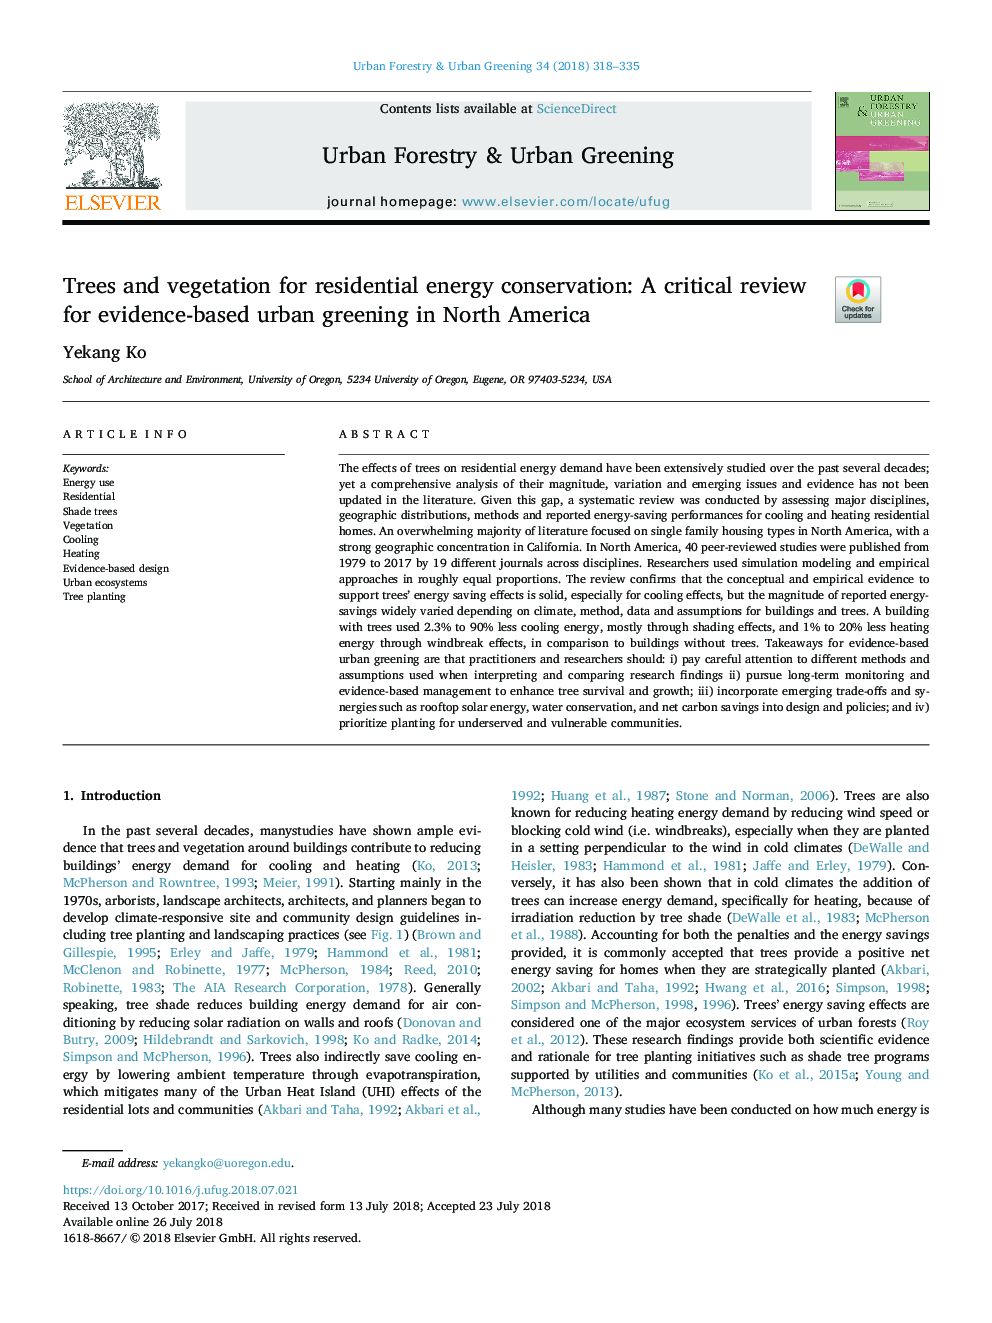 Trees and vegetation for residential energy conservation: A critical review for evidence-based urban greening in North America